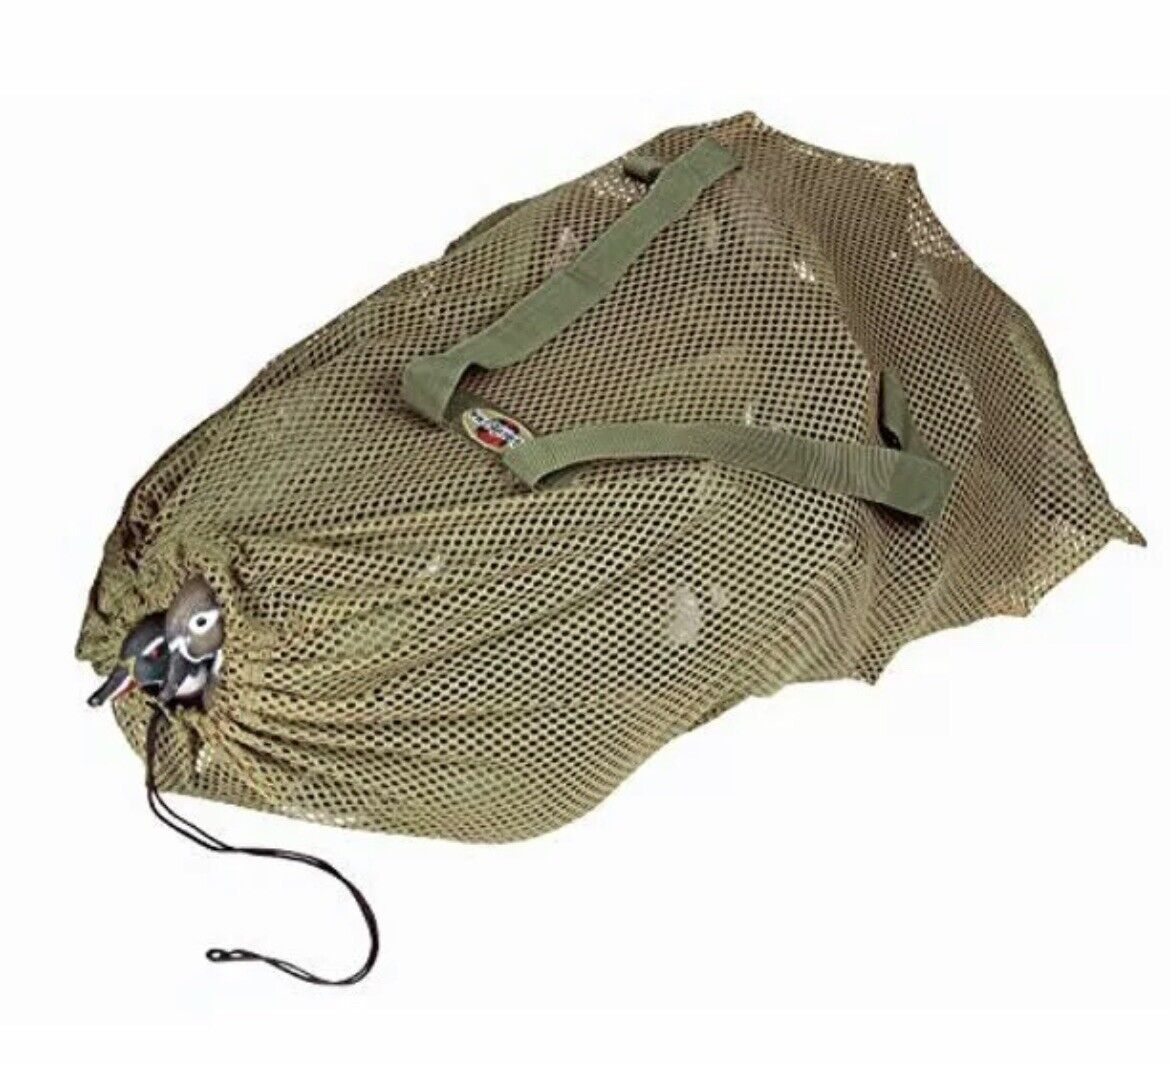 Flambeau Large Mesh Duck Hunting Decoy Bag-Holds Up To 36 Standard Decoys - NEW